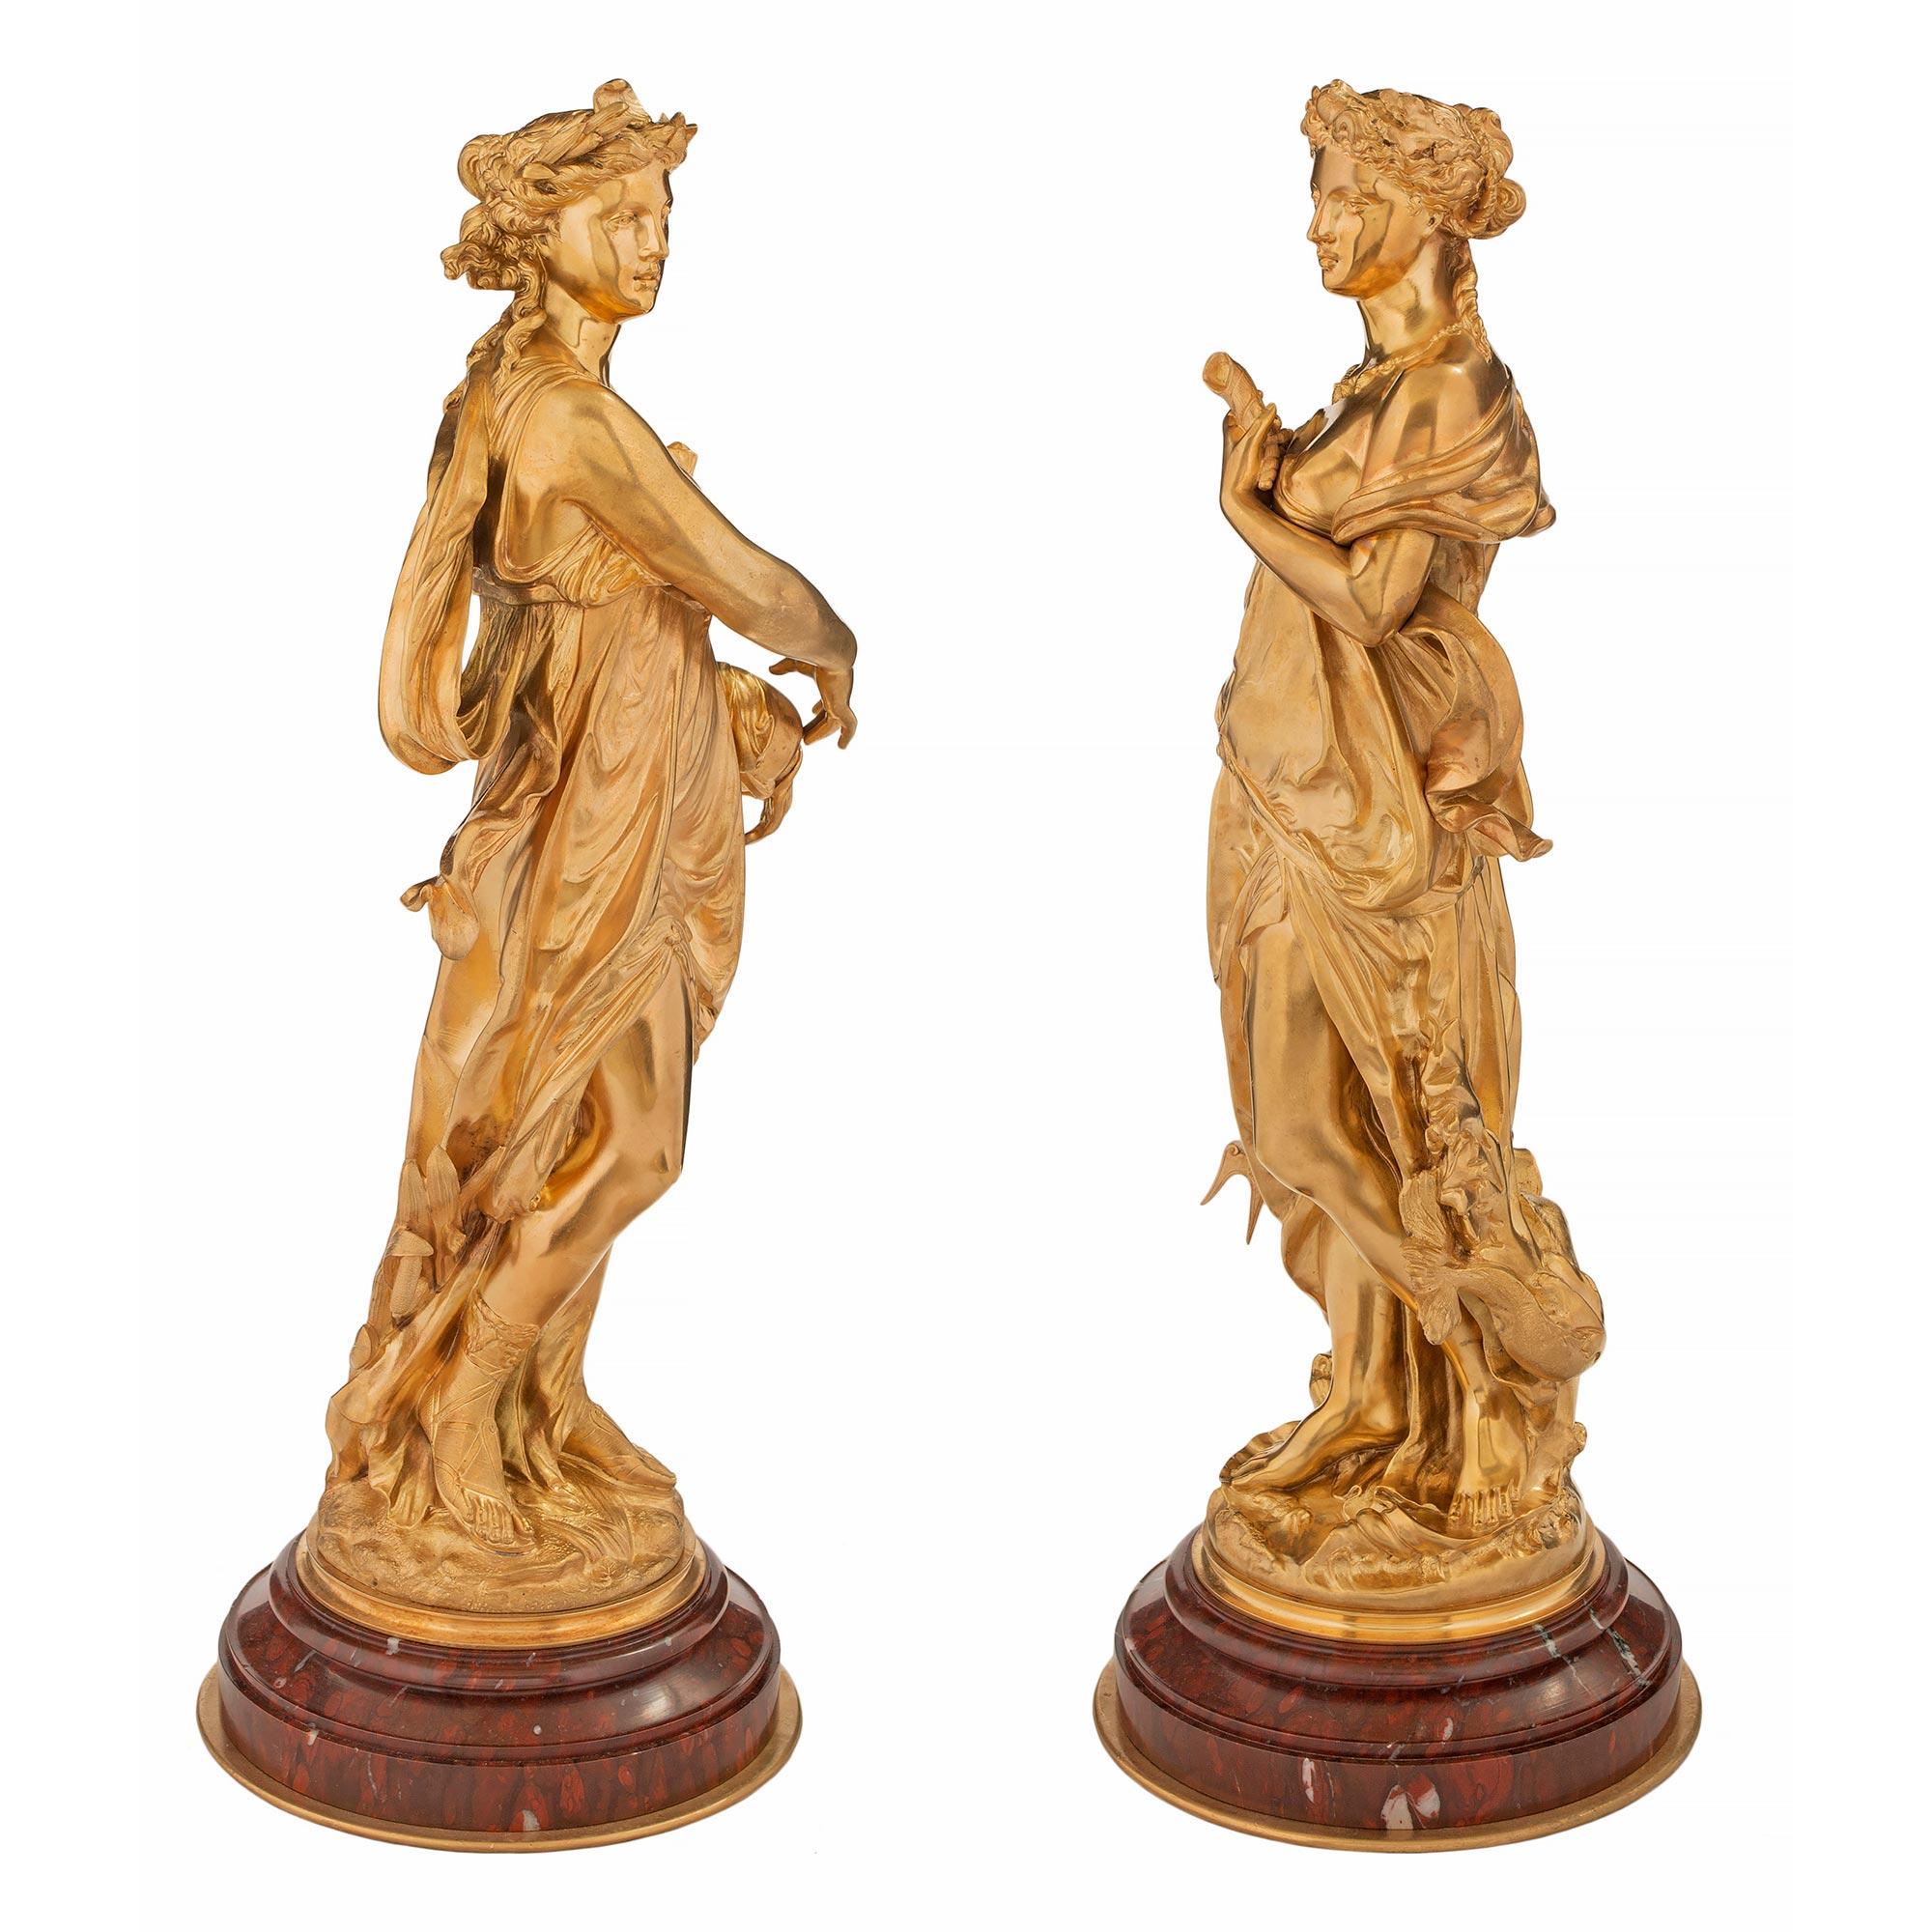 A striking true pair of French 19th century Louis XVI st. Belle Époque period ormolu and rouge Griotte statues. Each statue is raised by a circular rouge Griotte base with a fine bottom ormolu band and a mottled design. The statues are of beautiful